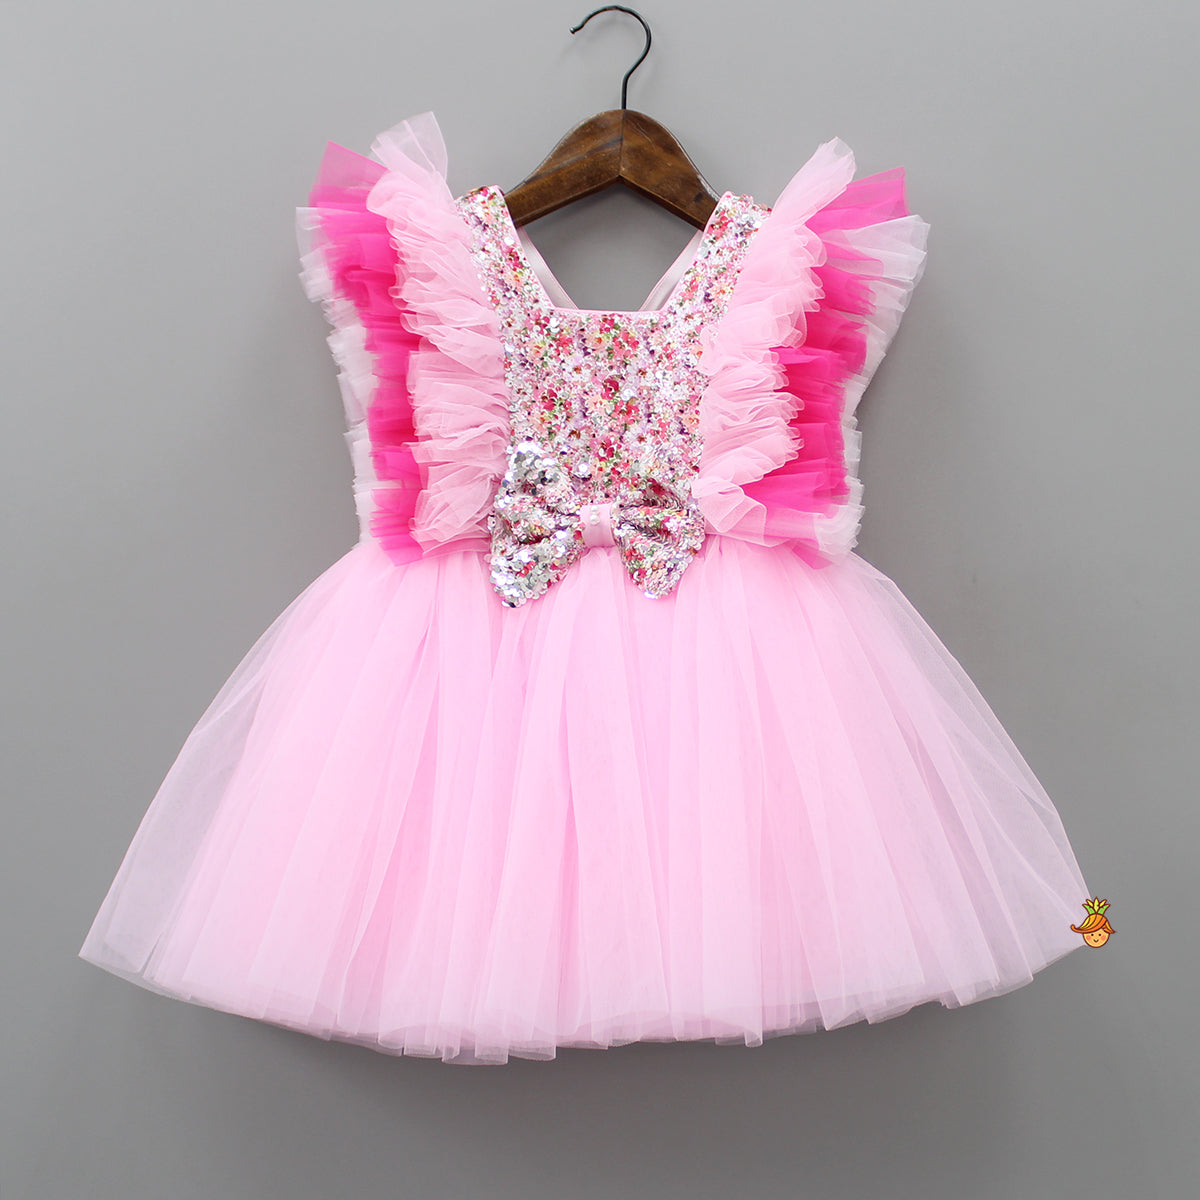 Cute Sequin Work Pink Dress With Hair Clip